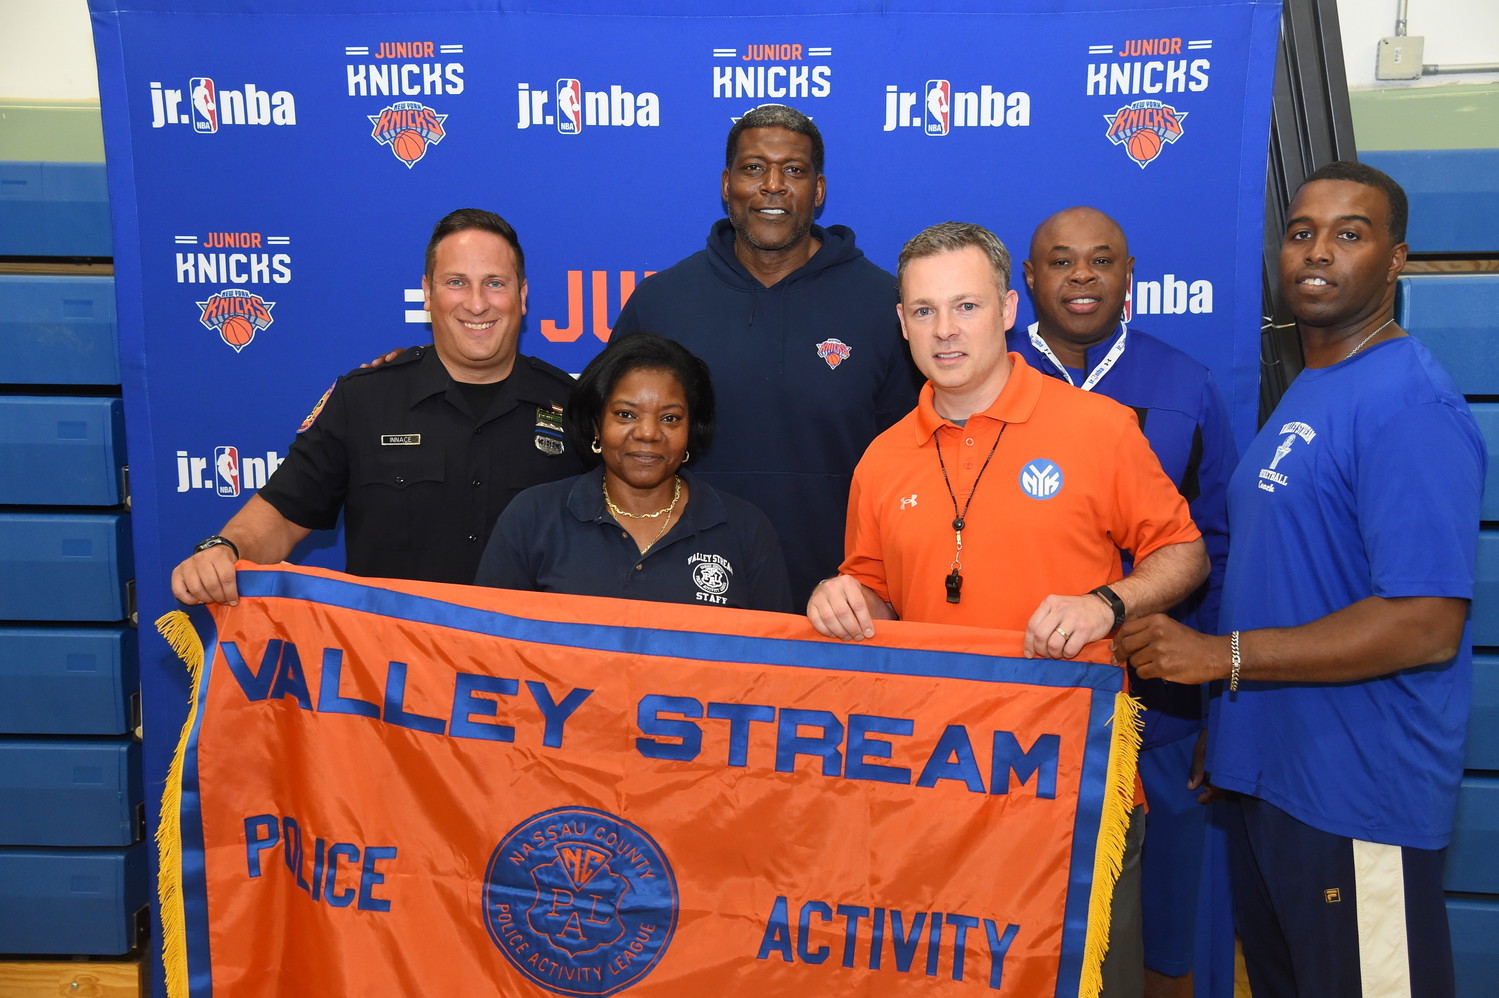 Police Activity League coaches and directors Chris Innace, Annette Gray-Thom, Steve Thom and Ramsey Jenkins applied for the Papa John’s Pizza Party and won a two-hour basketball clinic with Larry Johnson, third from left, and Knicks’ Director of Fan Experience Brendan Callahan, fourth from left.